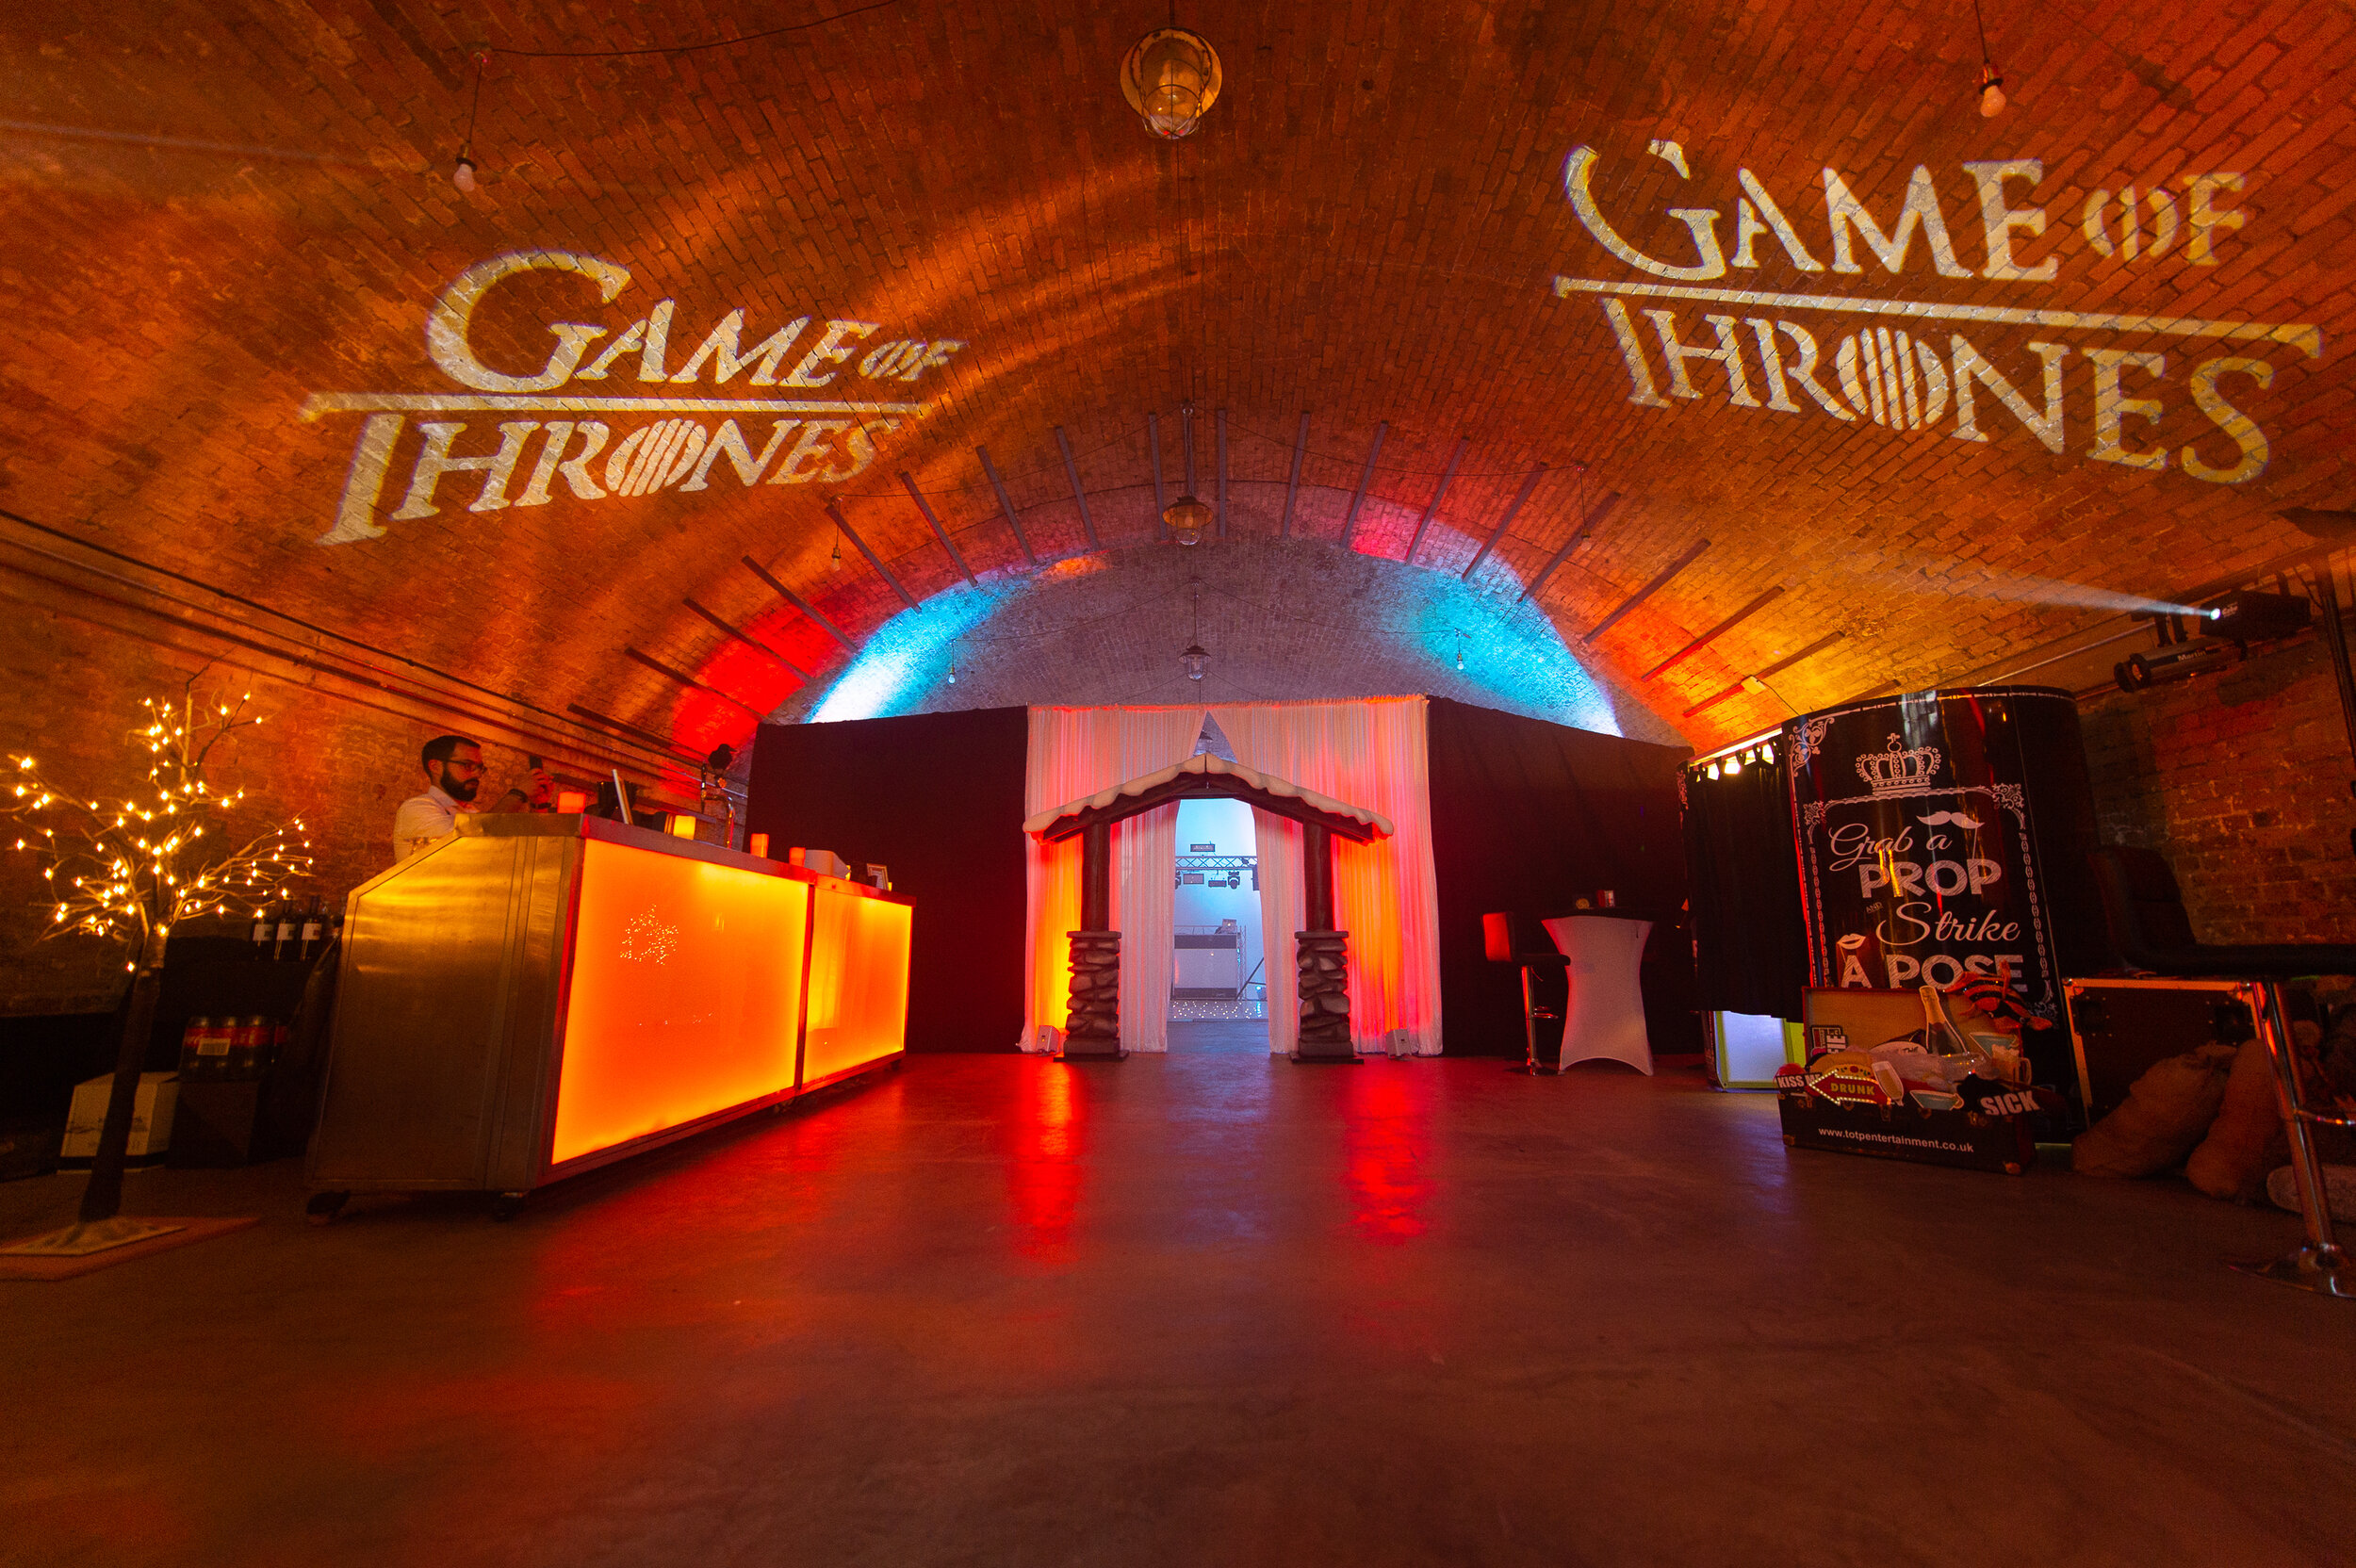 Corporate Event Venue Hire in Shoreditch / Hoxton / East London - Game Of Thrones Event